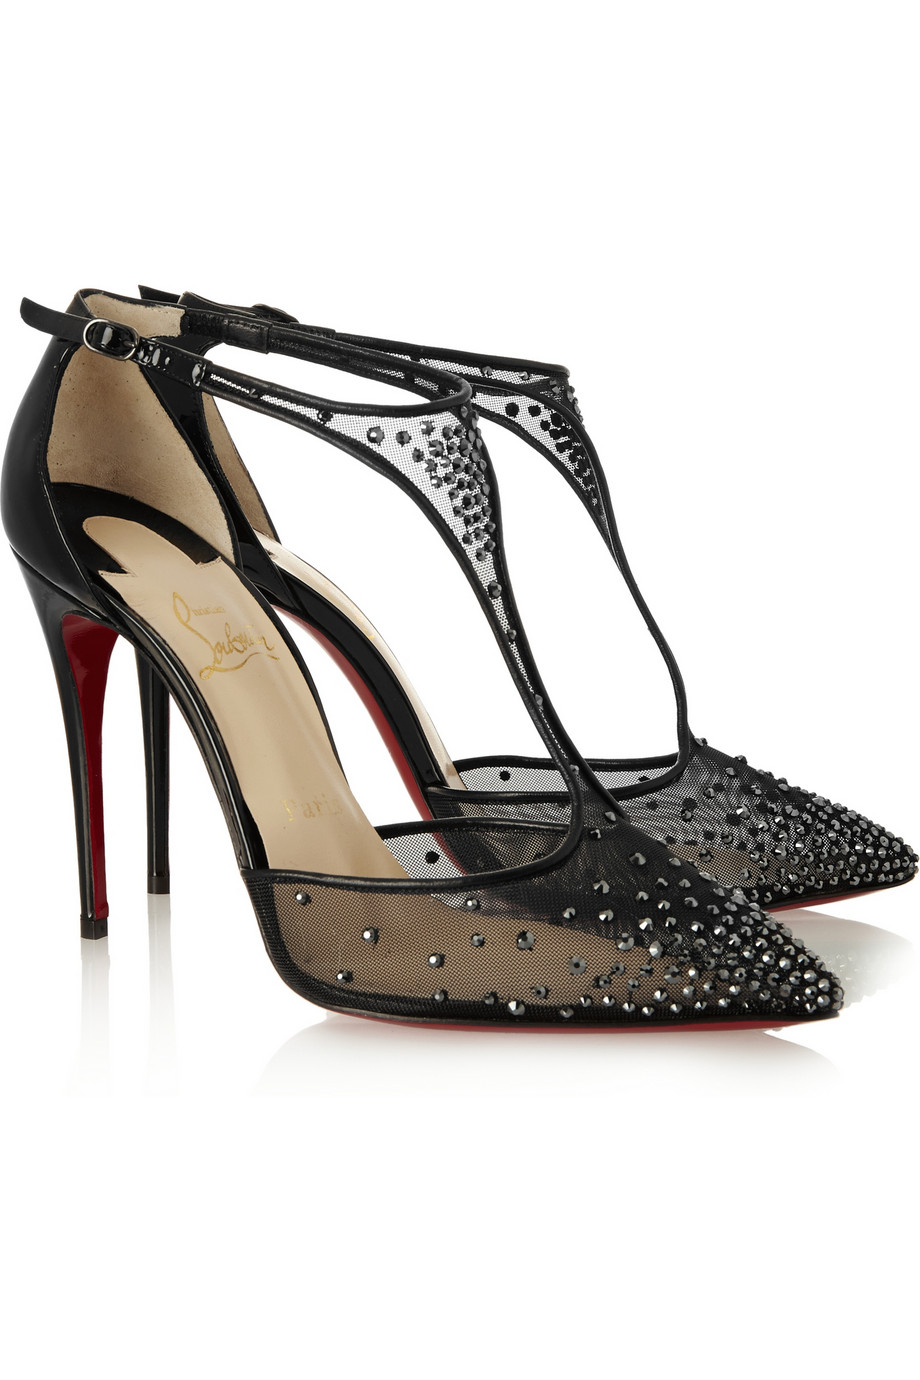 louboutin replicas - Christian louboutin Salopatina Embellished Patent Leather Pumps in ...